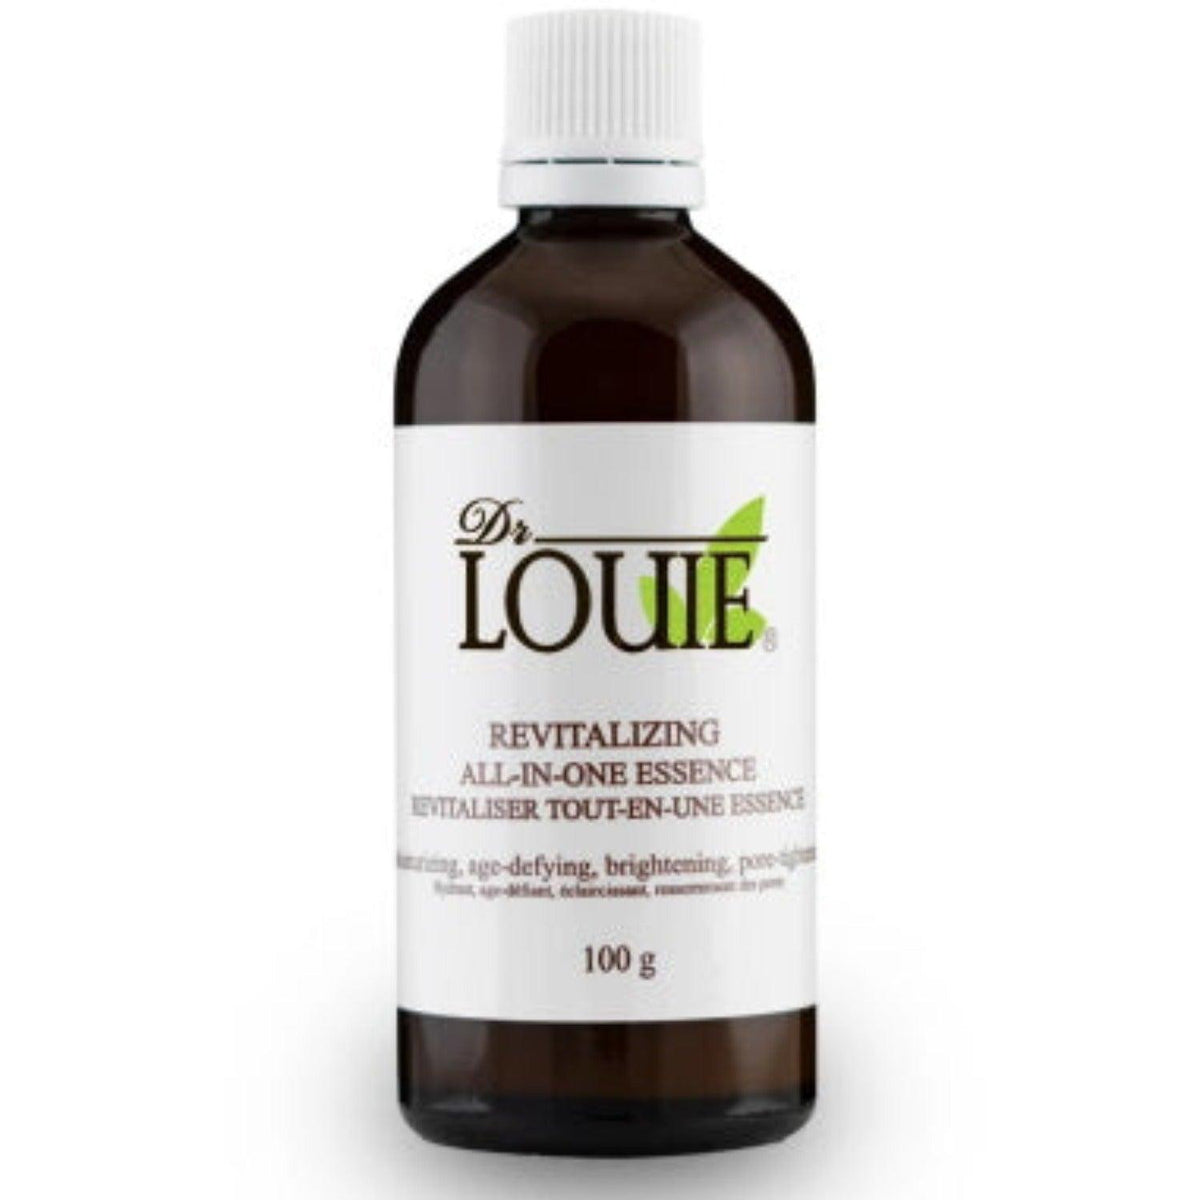 Dr. Louie Revitalizing All-in-One Essence 100g Face Serum at Village Vitamin Store